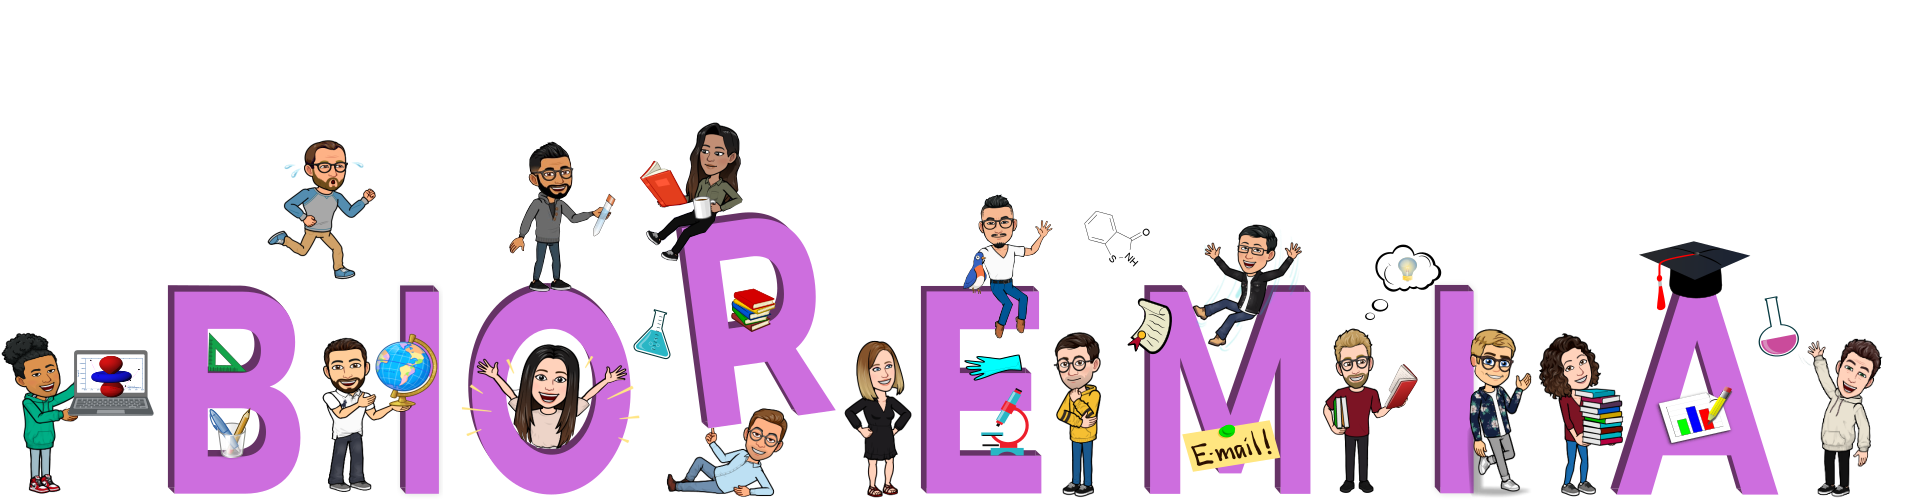 Our 15 PhD students as Bitmoji characters